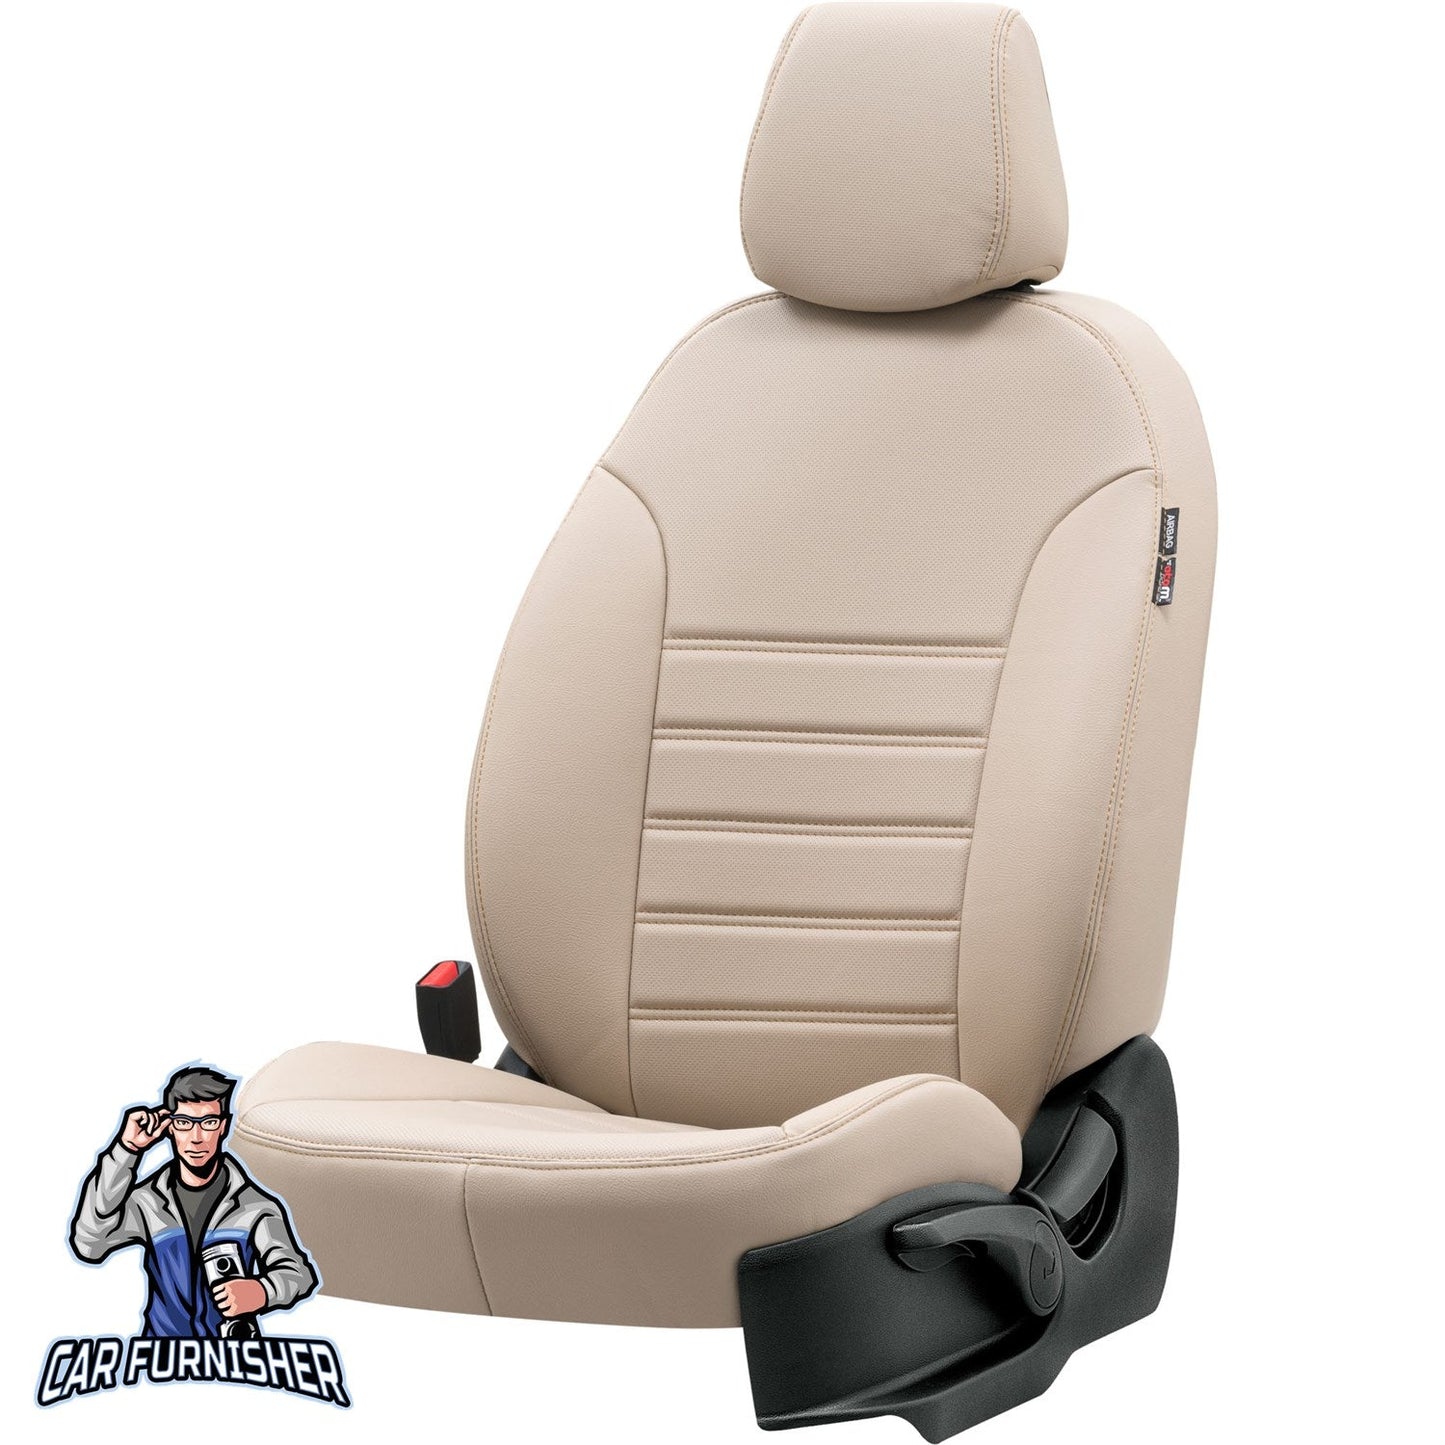 Mitsubishi Colt Seat Covers Istanbul Leather Design Beige Leather